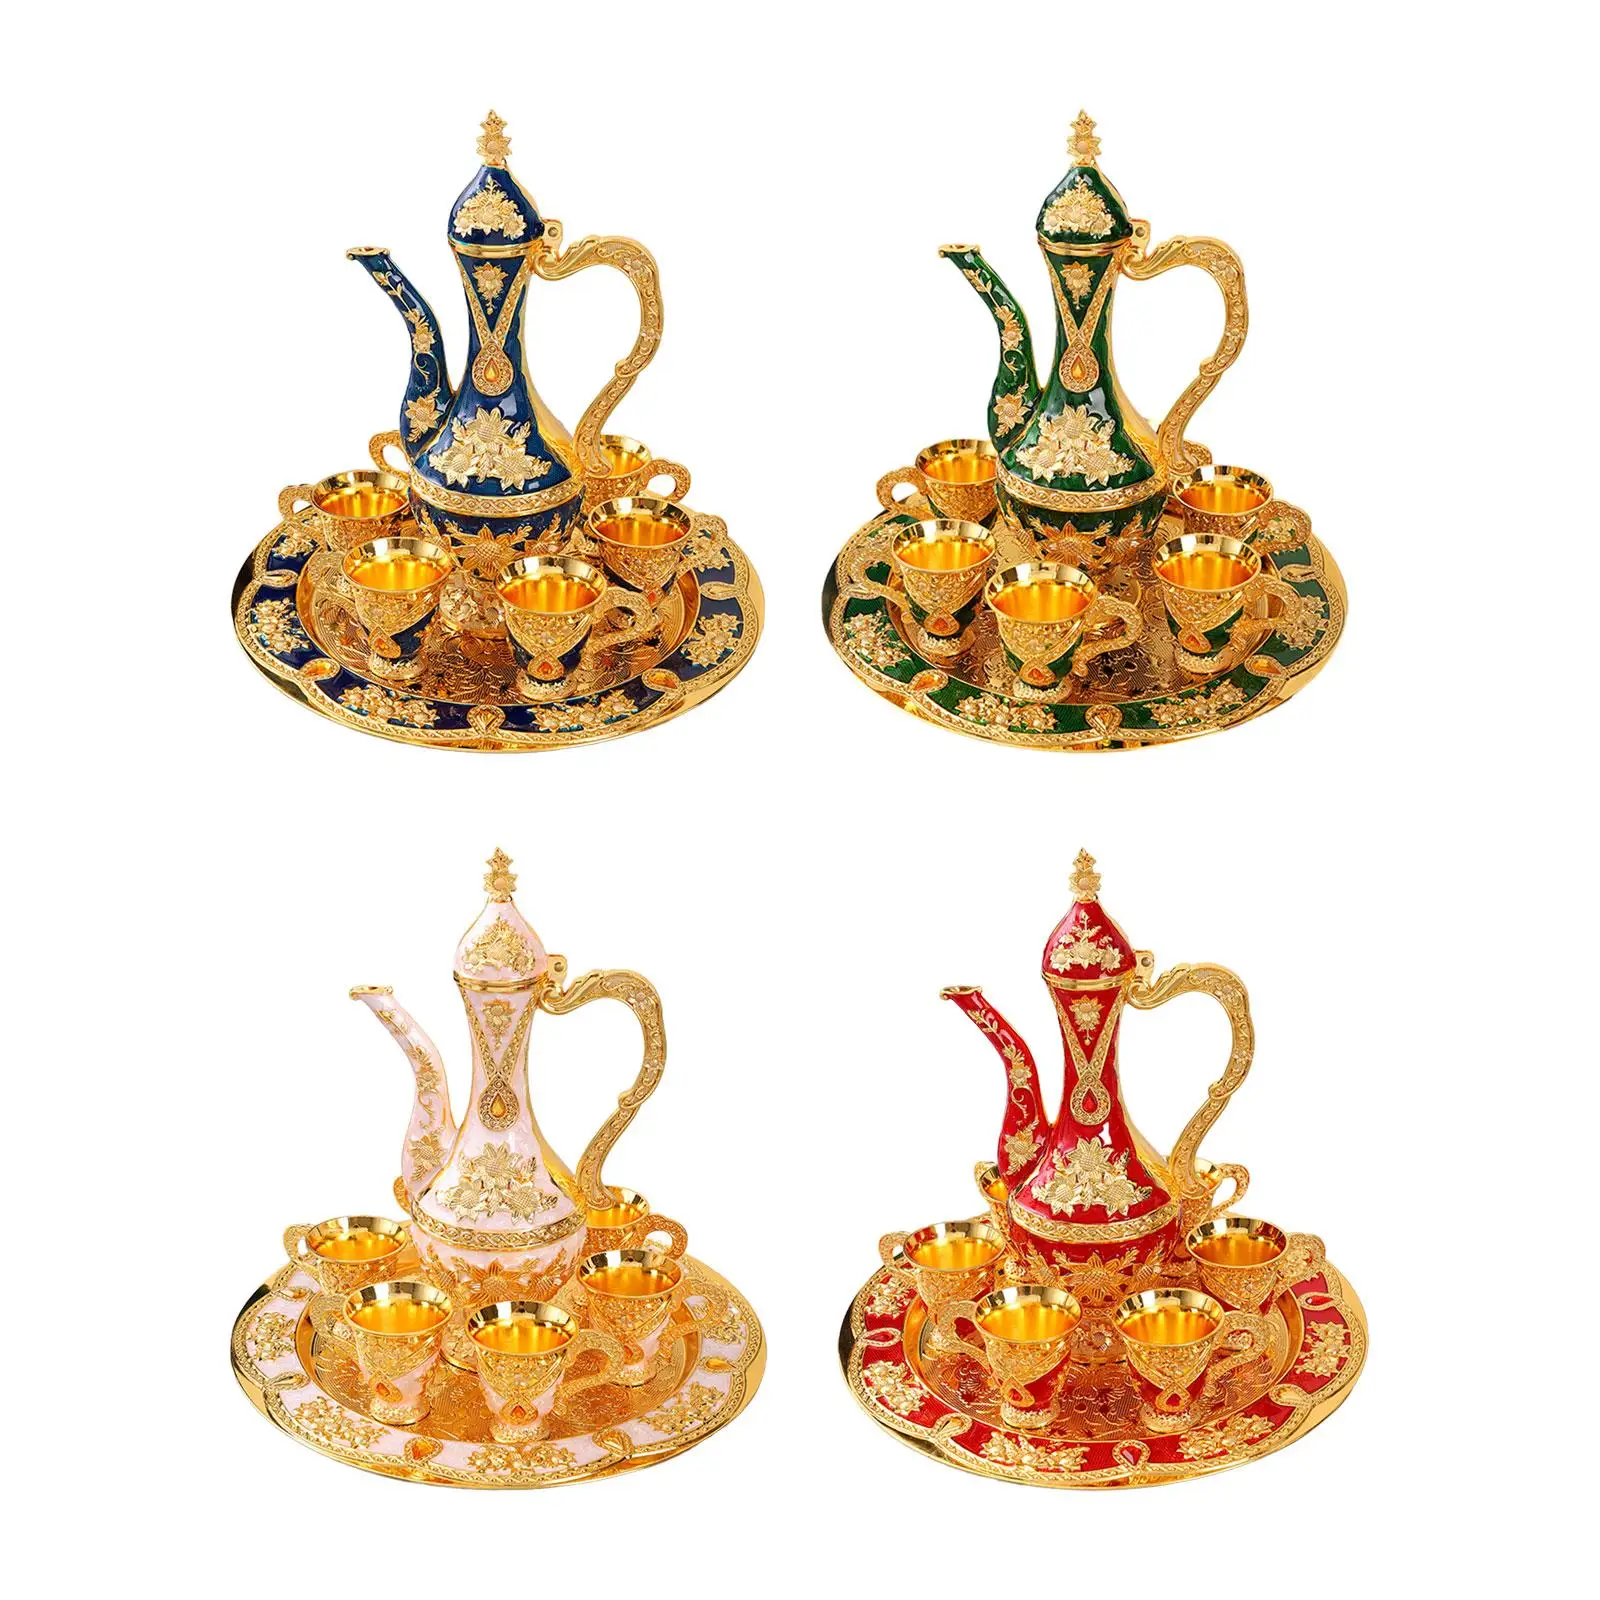 Vintage Turkish Coffee Set with Pot Beverage Drinkware for Dining Room Home